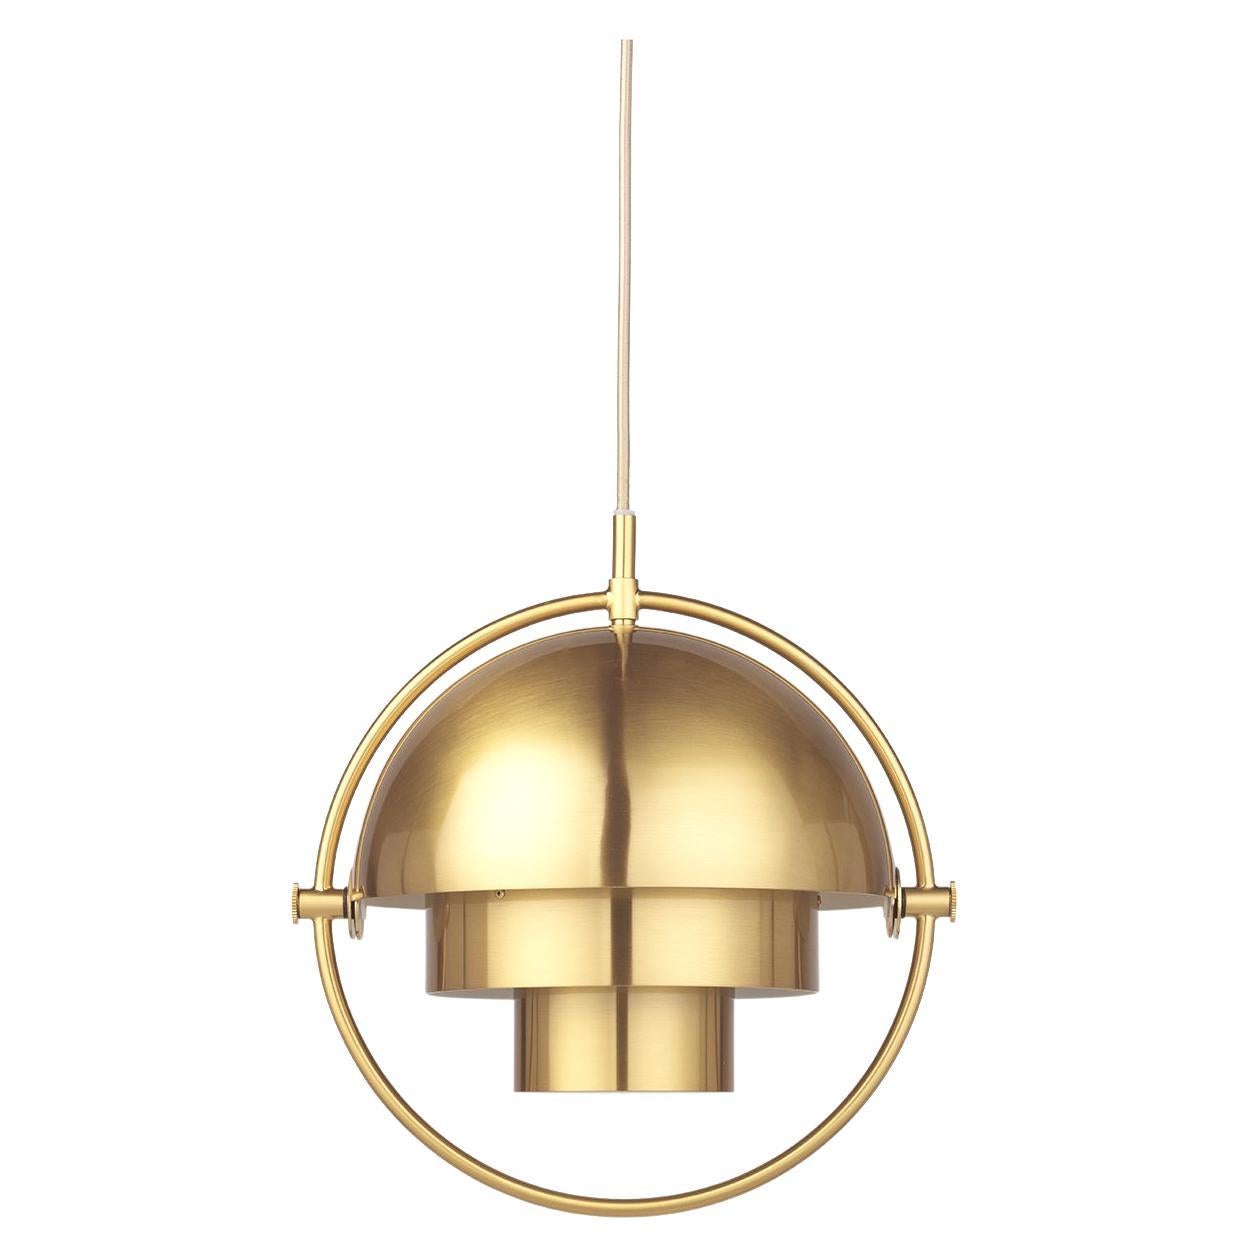 The Multi-Lite pendant embraces the golden era of Danish design with its characteristic shape of two opposing outside, mobile shades that enable creating a personal installation and a wide range of lighting values in a room.

The Multi-Lite